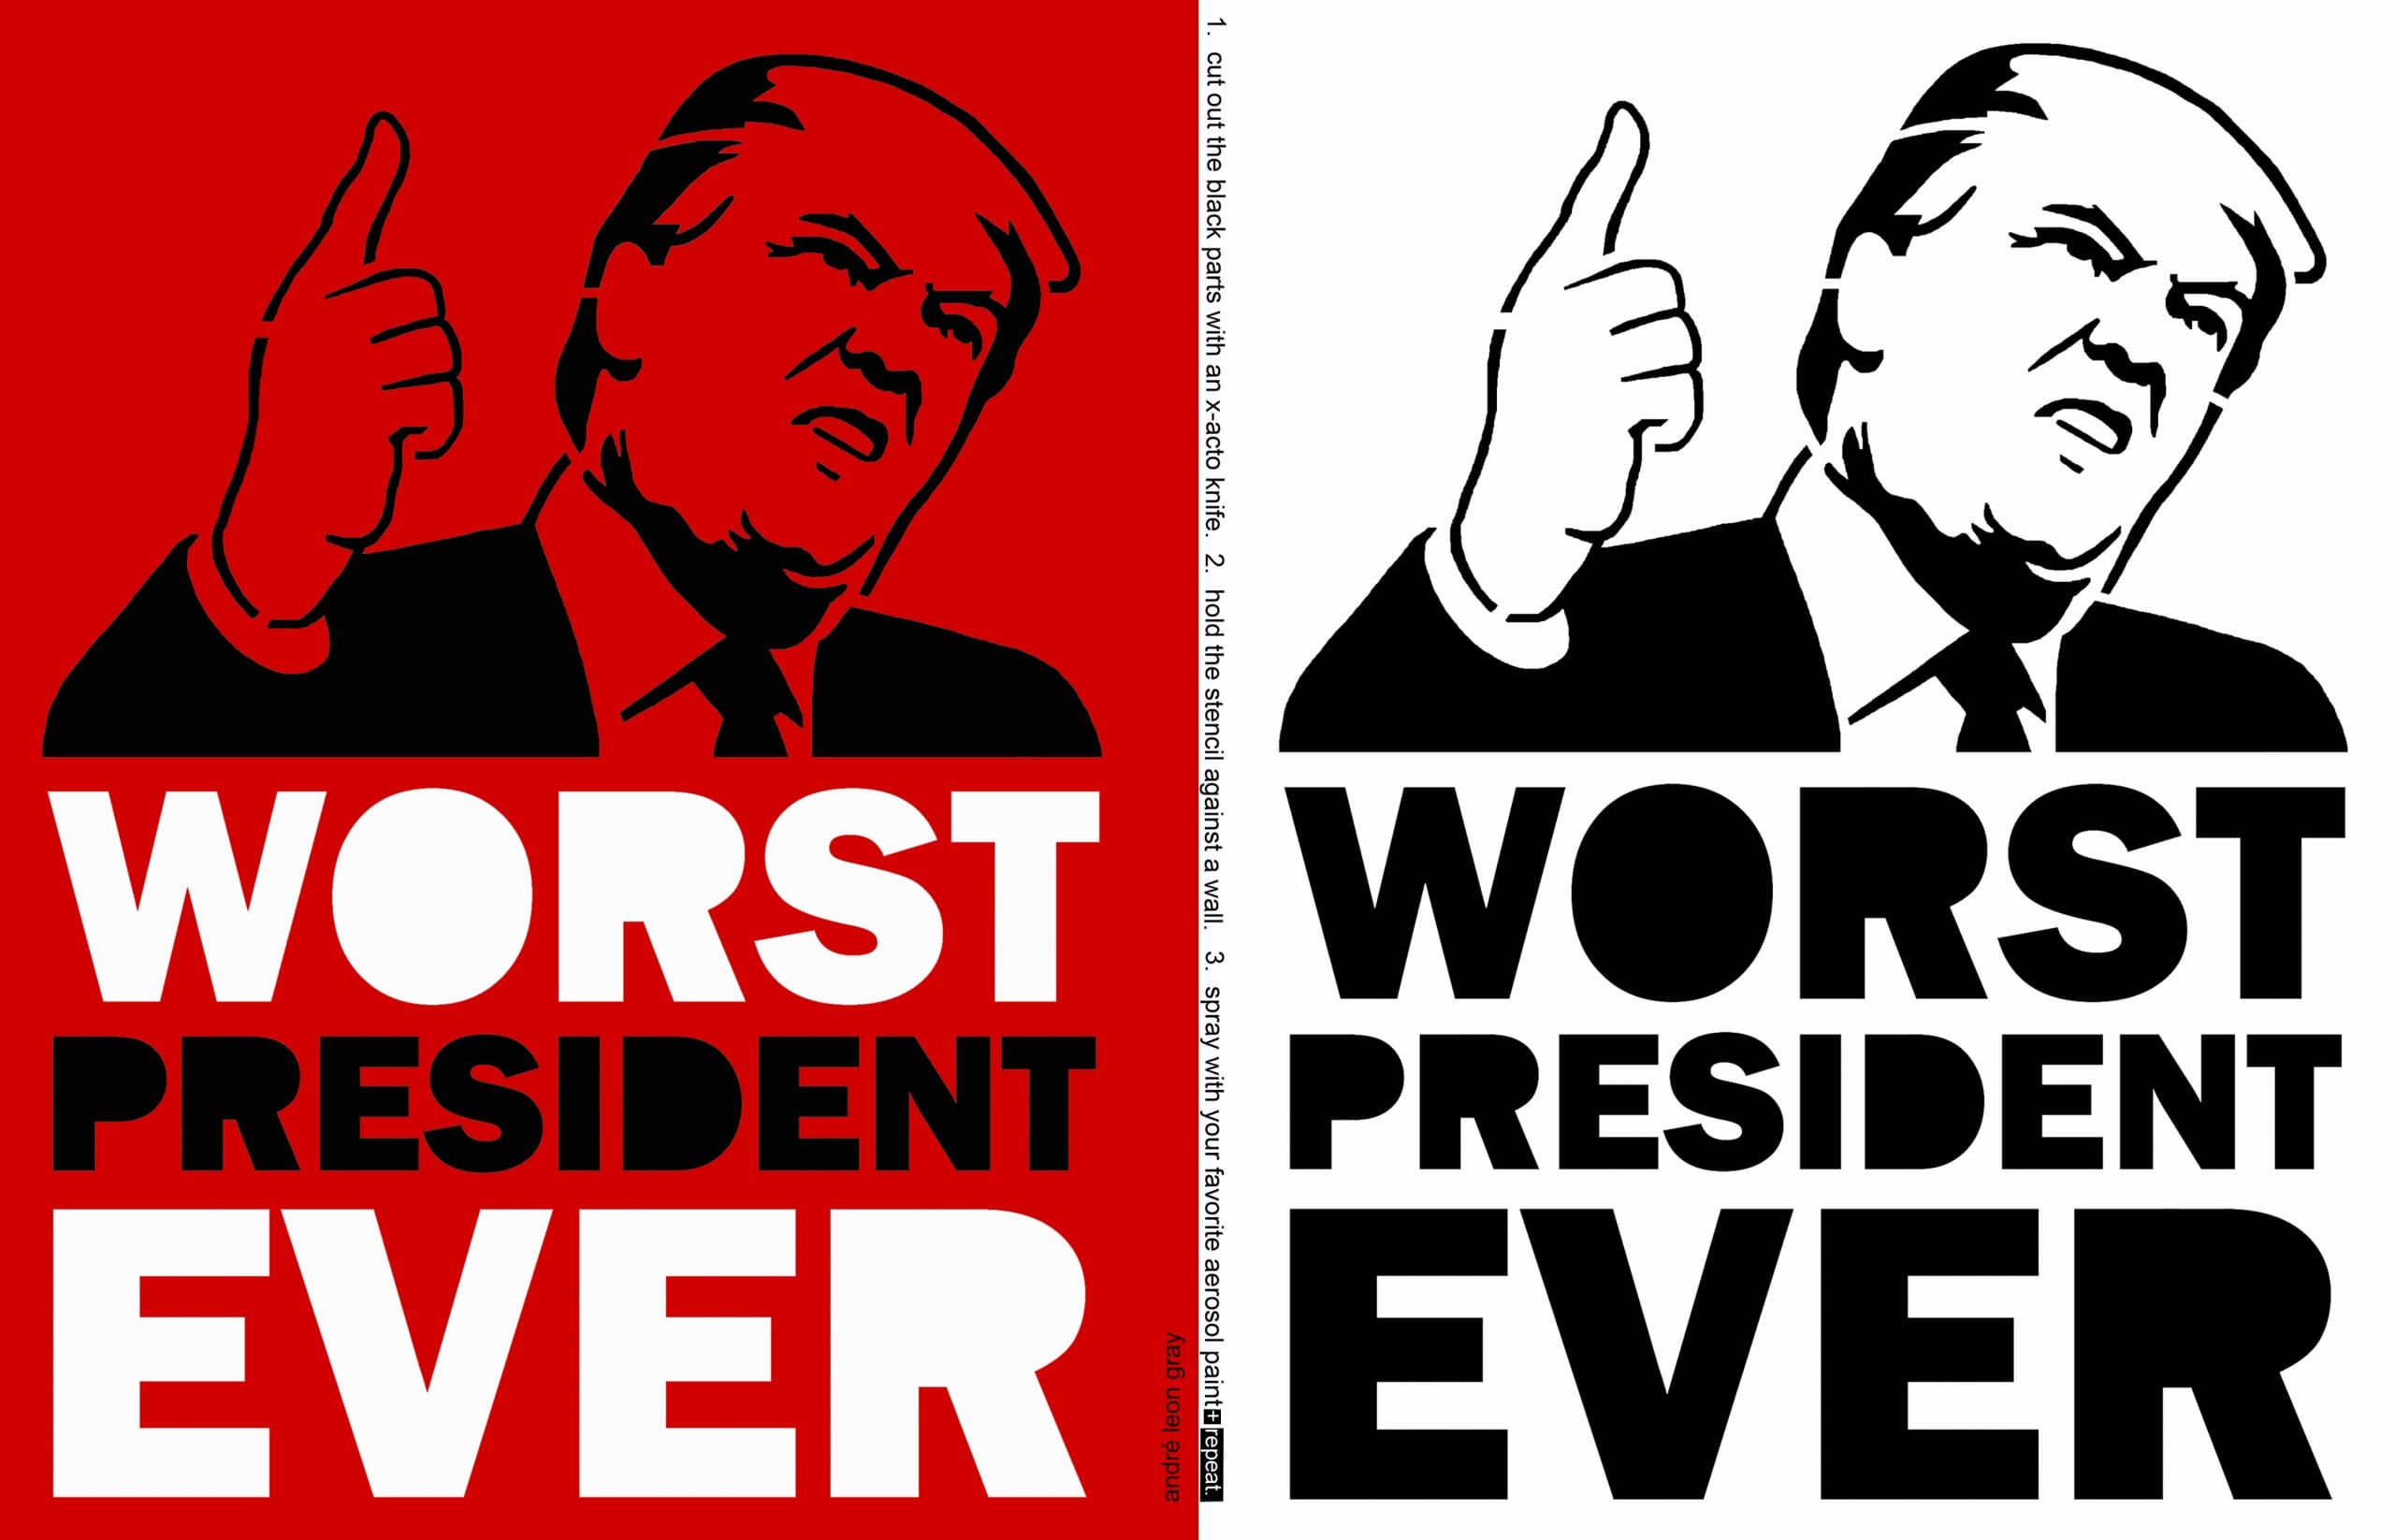 Twice-repeating stenciled graphic illustration of Donald Trump from shoulders up, pointing his right index finger in the air while pursing his mouth and looking out top right corner of the image, with the phrase “Worst President Ever” in all-caps bold letters